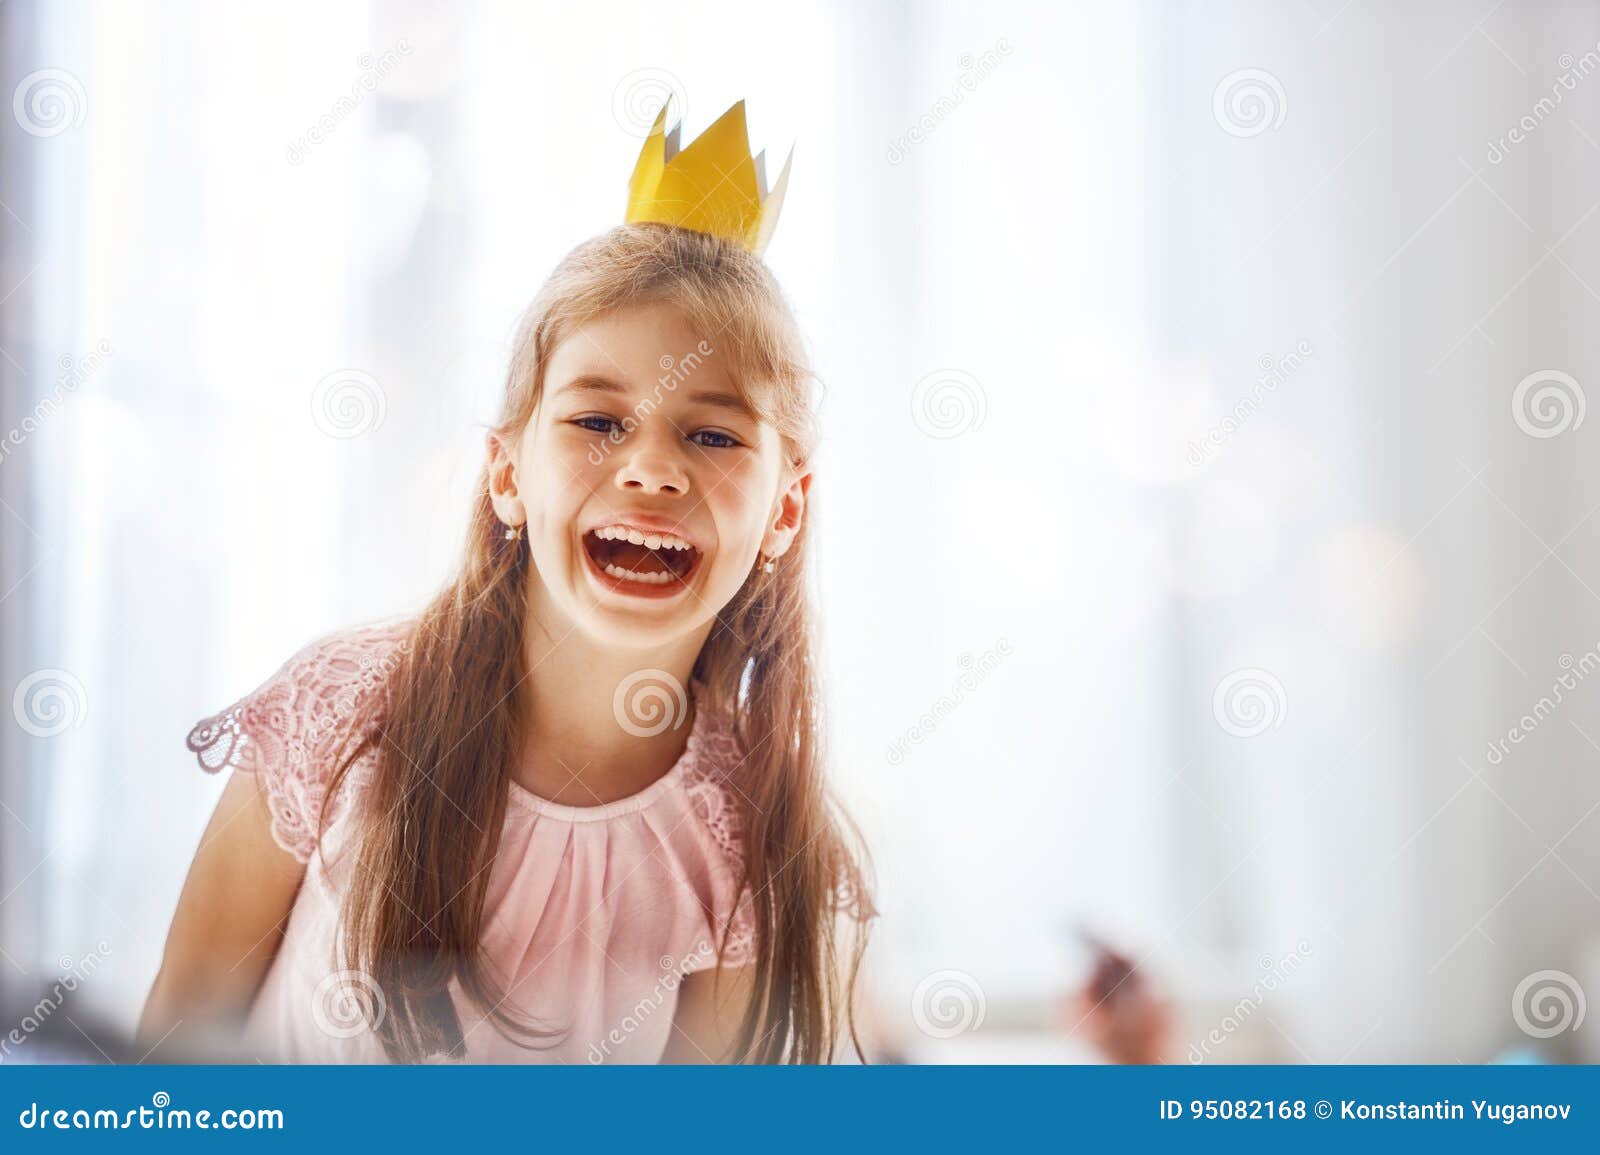 Girl in a princess costume stock photo. Image of dress - 95082168